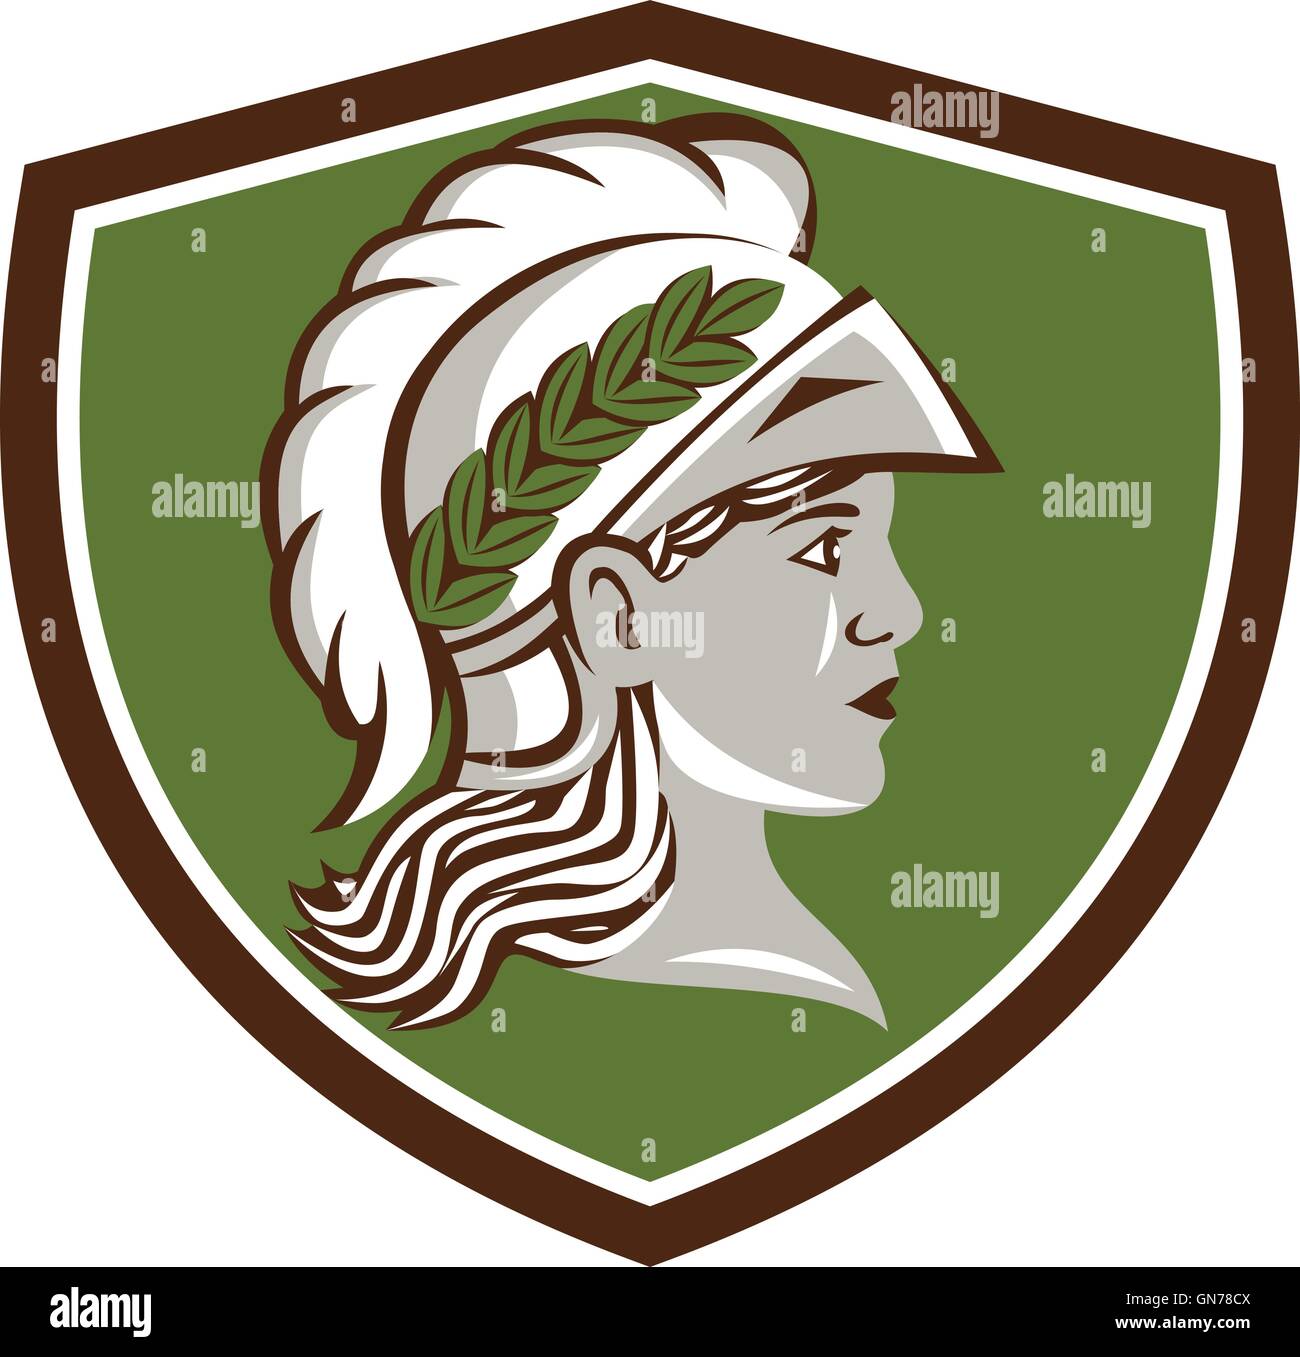 Illustration of Minerva or Menrva, the Roman goddess of wisdom and sponsor of arts, trade, and strategy wearing helment and laurel crown viewed from side set inside shield crest done in retro style. Stock Vector